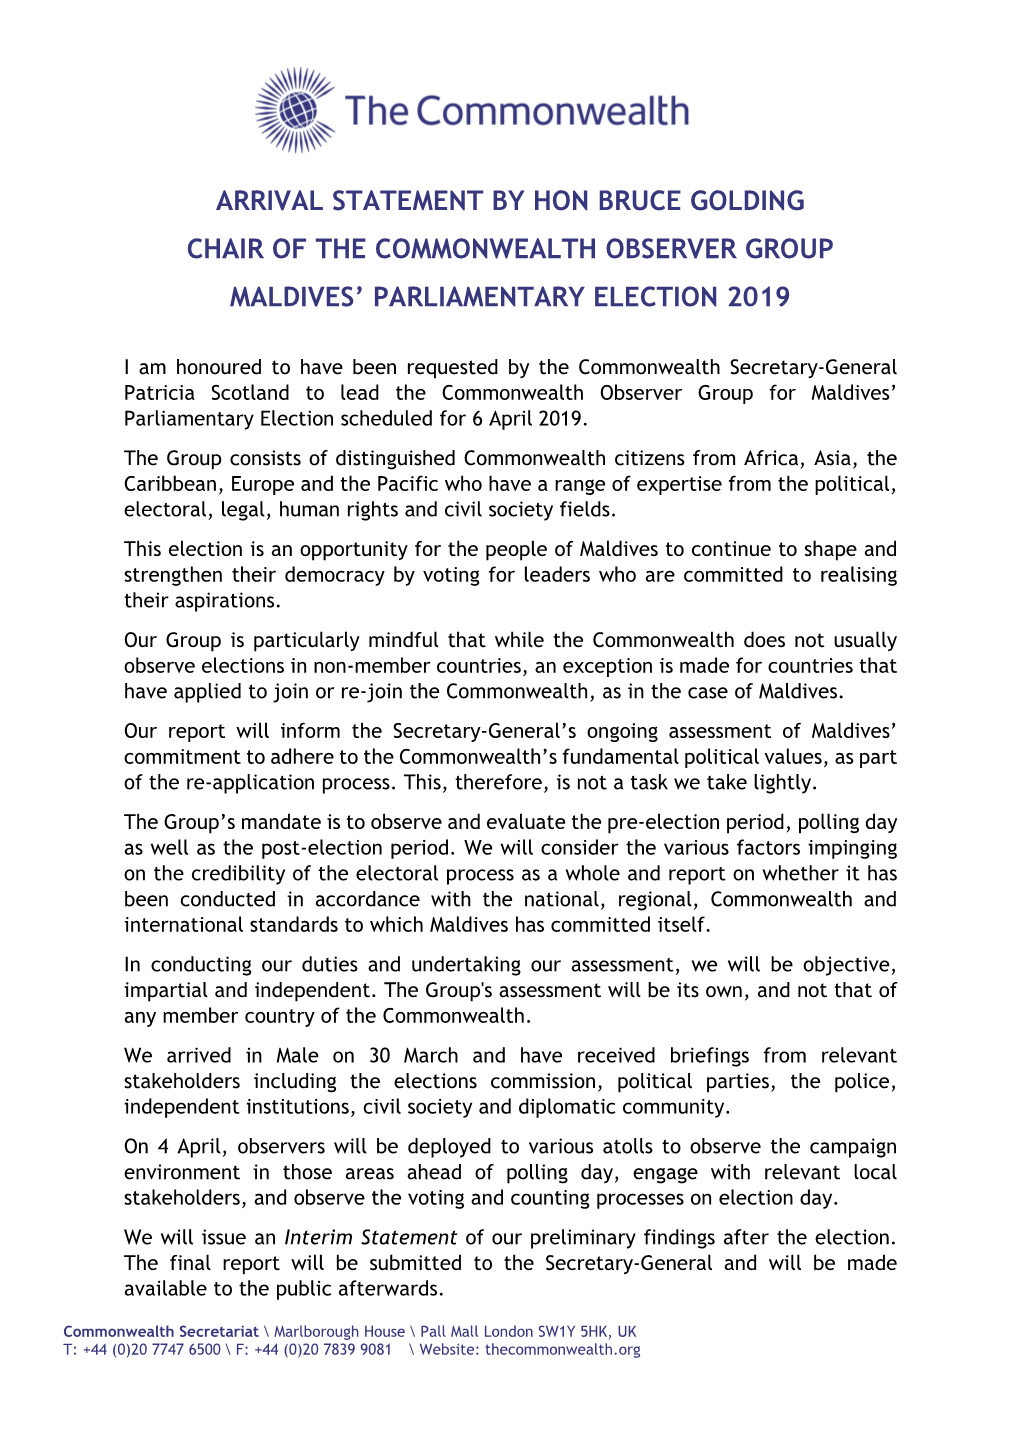 Arrival Statement by Hon Bruce Golding Chair of the Commonwealth Observer Group Maldives’ Parliamentary Election 2019